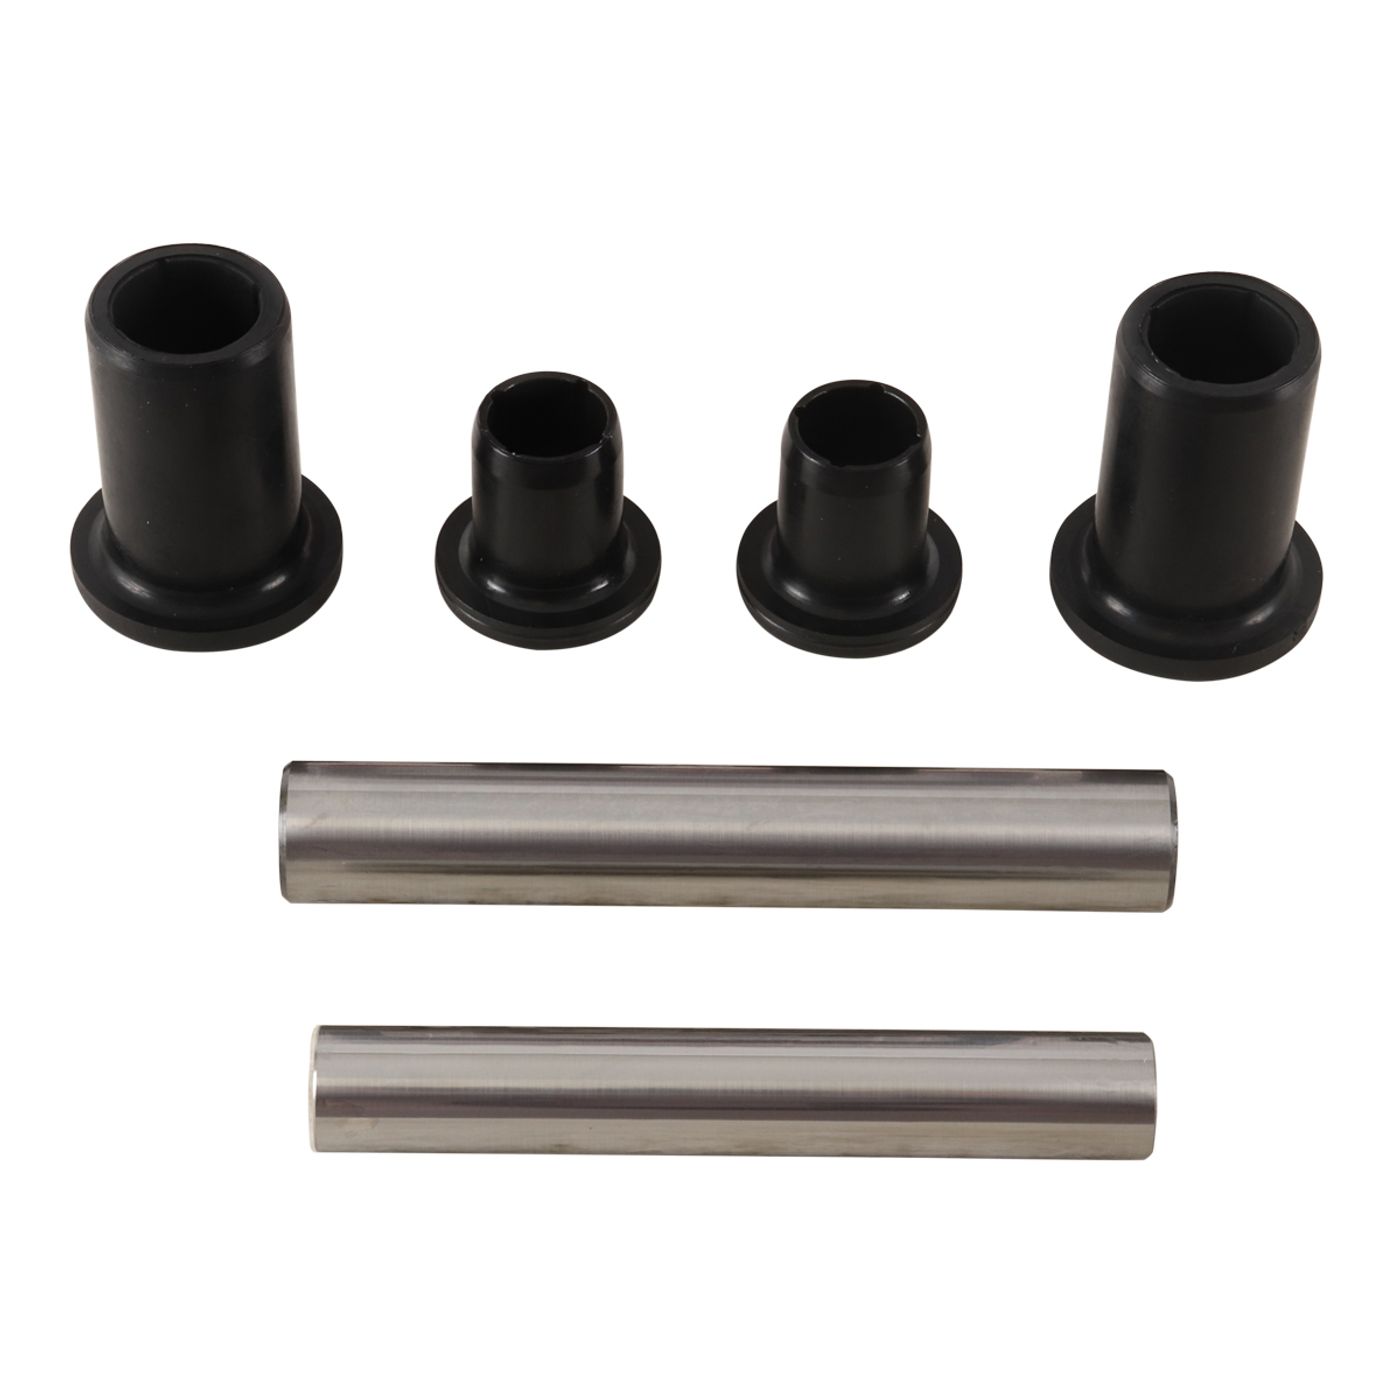 Wrp Rear Ind. Suspension Kits - WRP501207 image